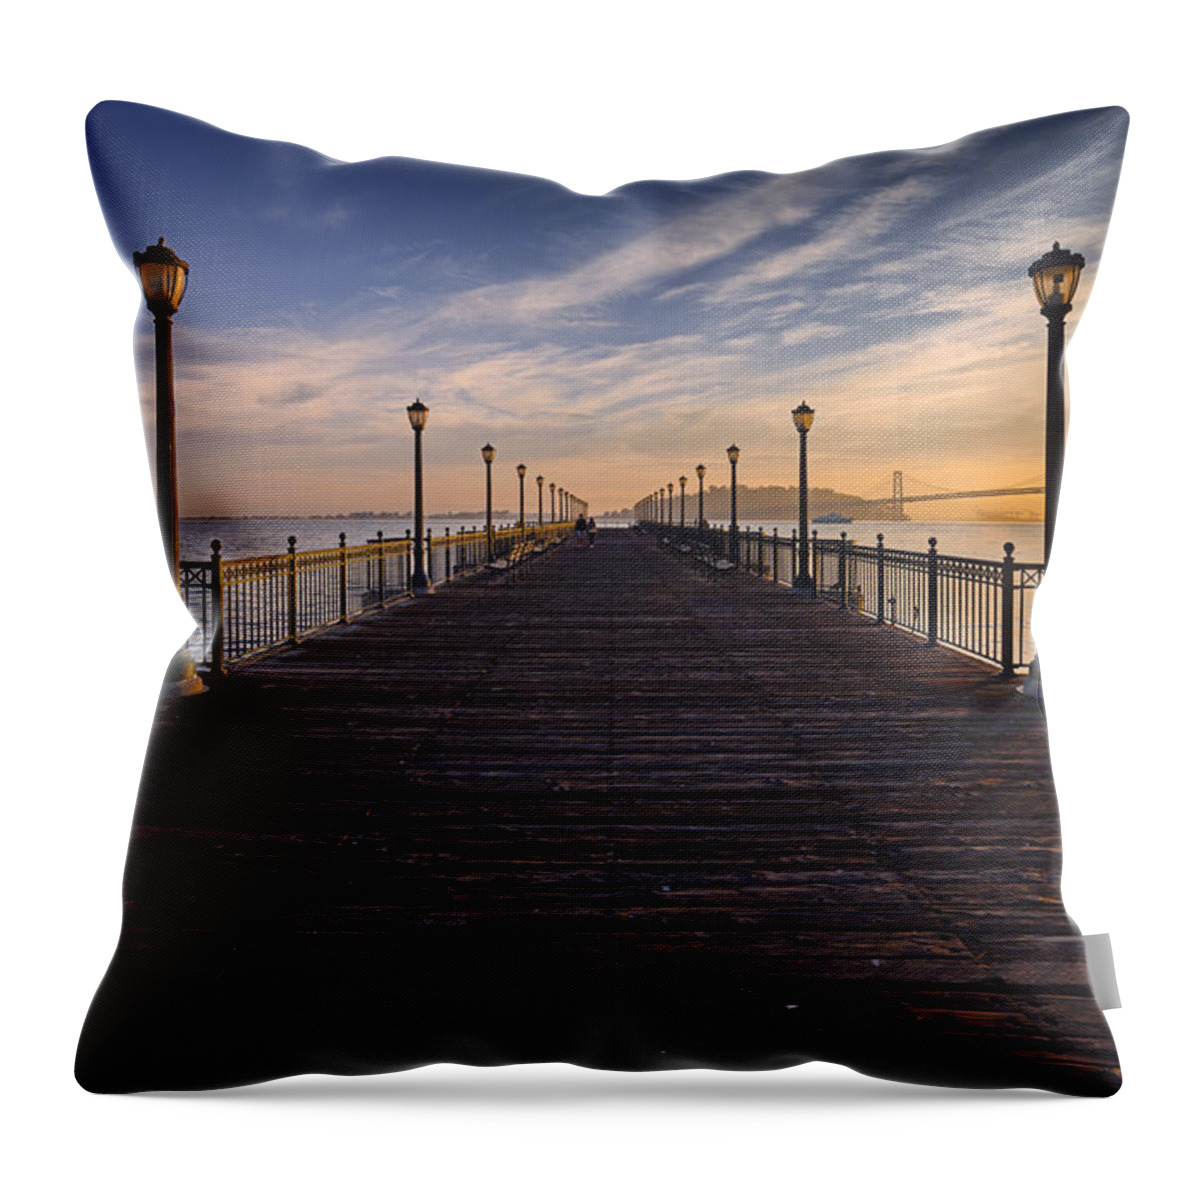 Pier Throw Pillow featuring the photograph Pier 7 by Dominique Dubied